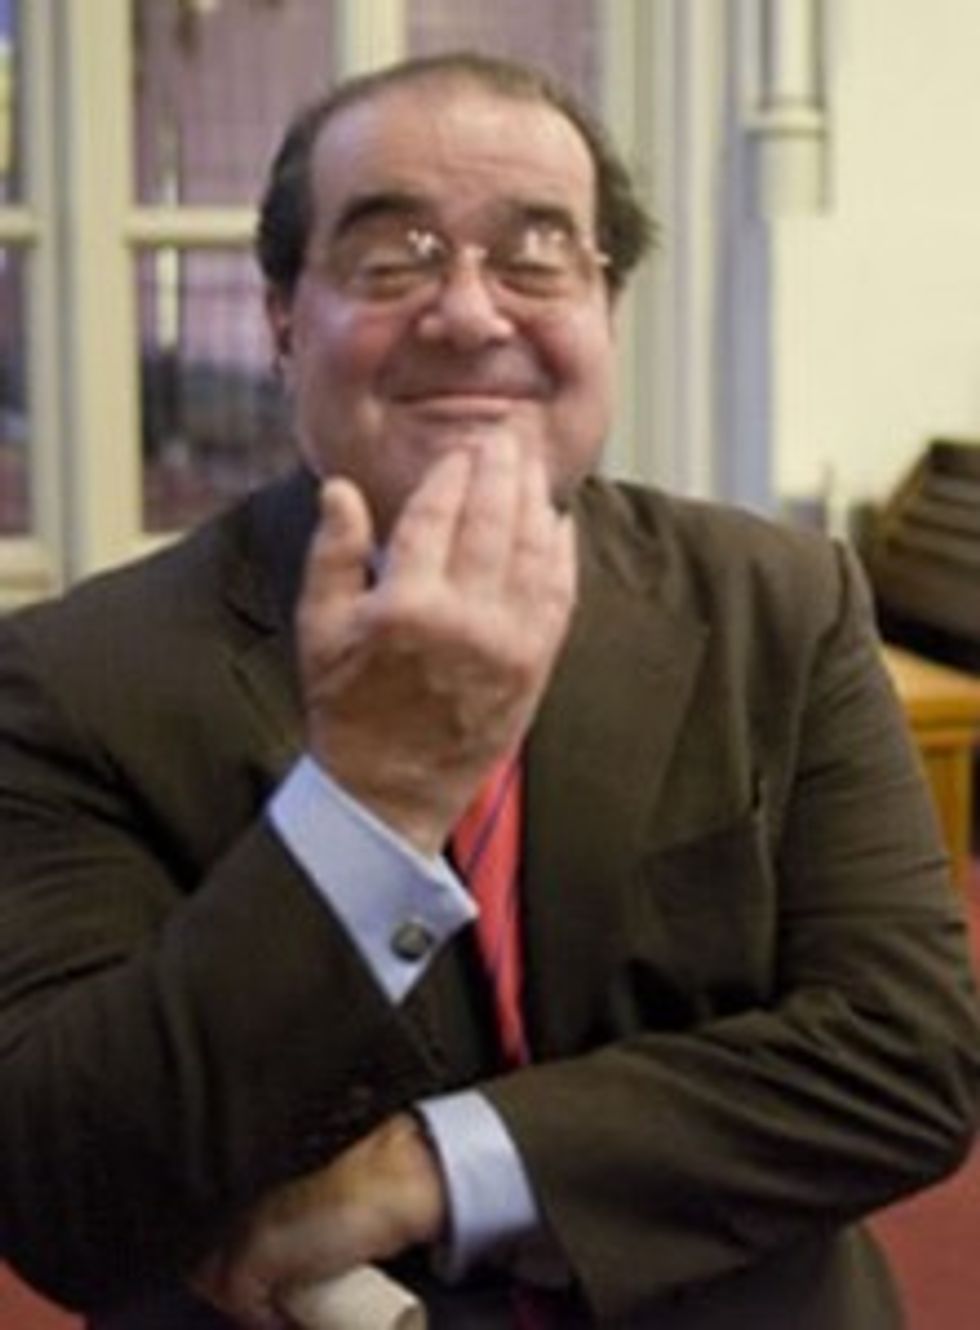 Antonin Scalia Knows Sodomy & Murder Not Same Thing, He Just Likes Saying They Are